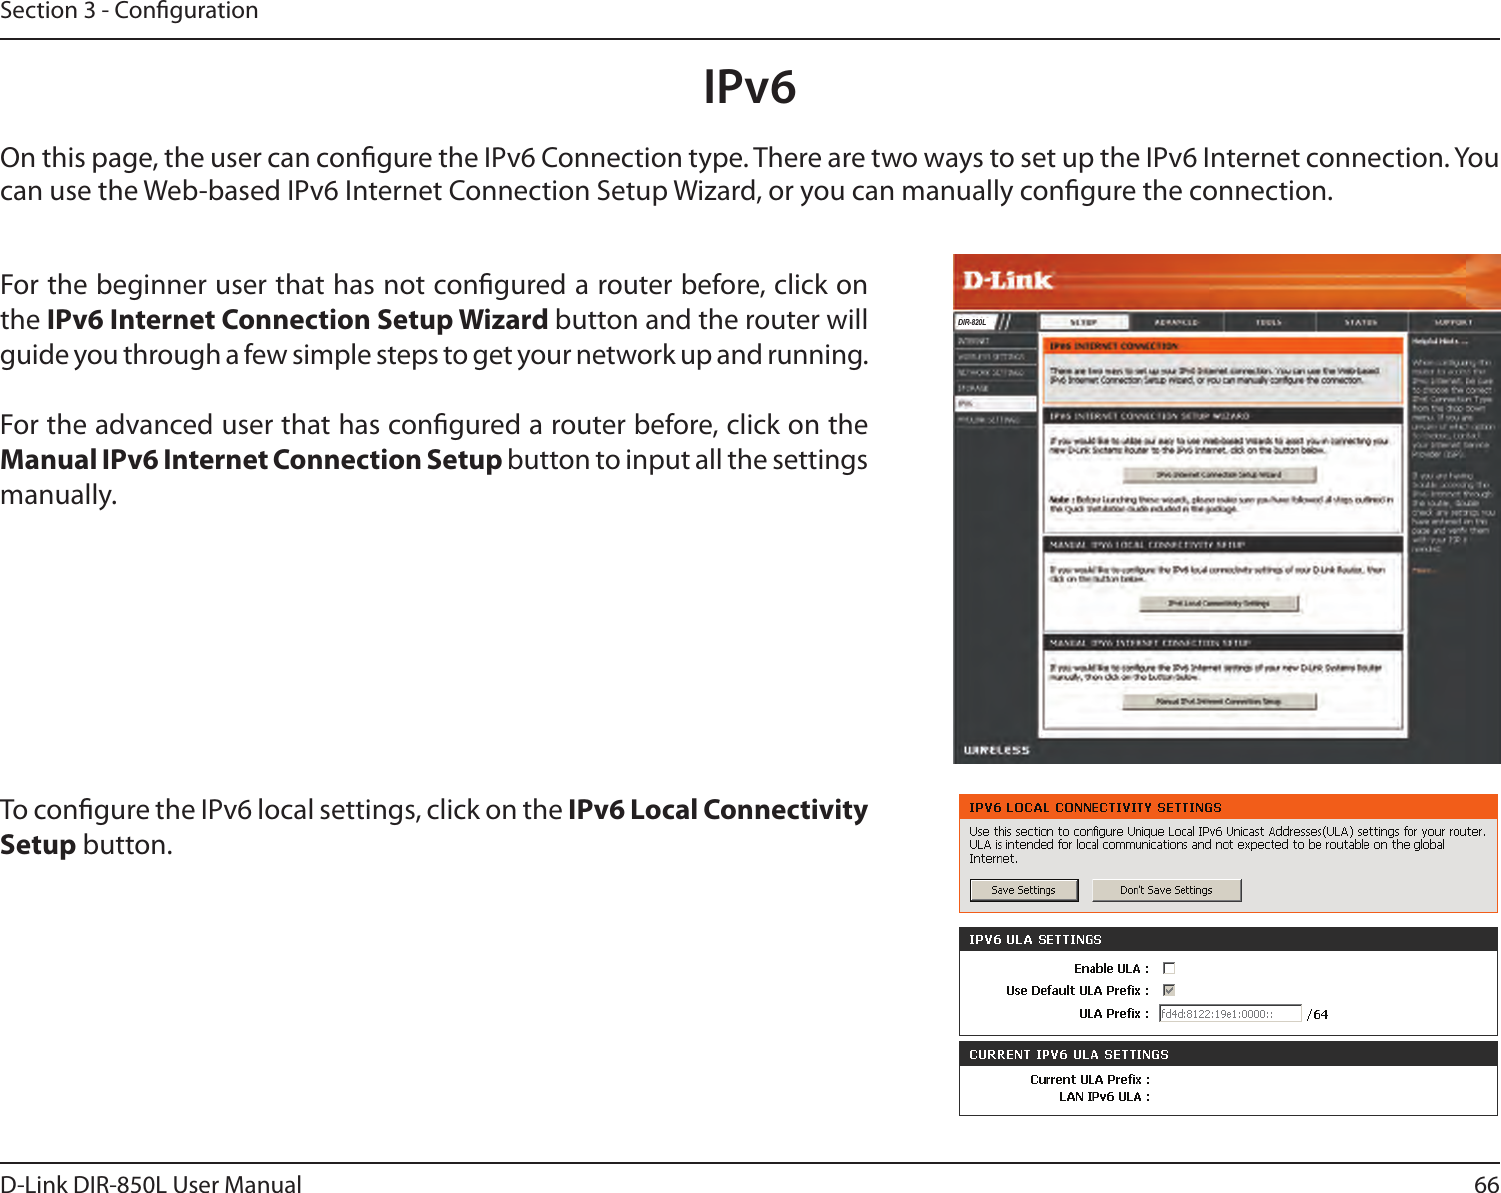 66D-Link DIR-850L User ManualSection 3 - CongurationIPv6On this page, the user can congure the IPv6 Connection type. There are two ways to set up the IPv6 Internet connection. You can use the Web-based IPv6 Internet Connection Setup Wizard, or you can manually congure the connection.For the beginner user that has not congured a router before, click on the IPv6 Internet Connection Setup Wizard button and the router will guide you through a few simple steps to get your network up and running.For the advanced user that has congured a router before, click on the Manual IPv6 Internet Connection Setup button to input all the settings manually.To congure the IPv6 local settings, click on the IPv6 Local Connectivity Setup button.DIR-820L